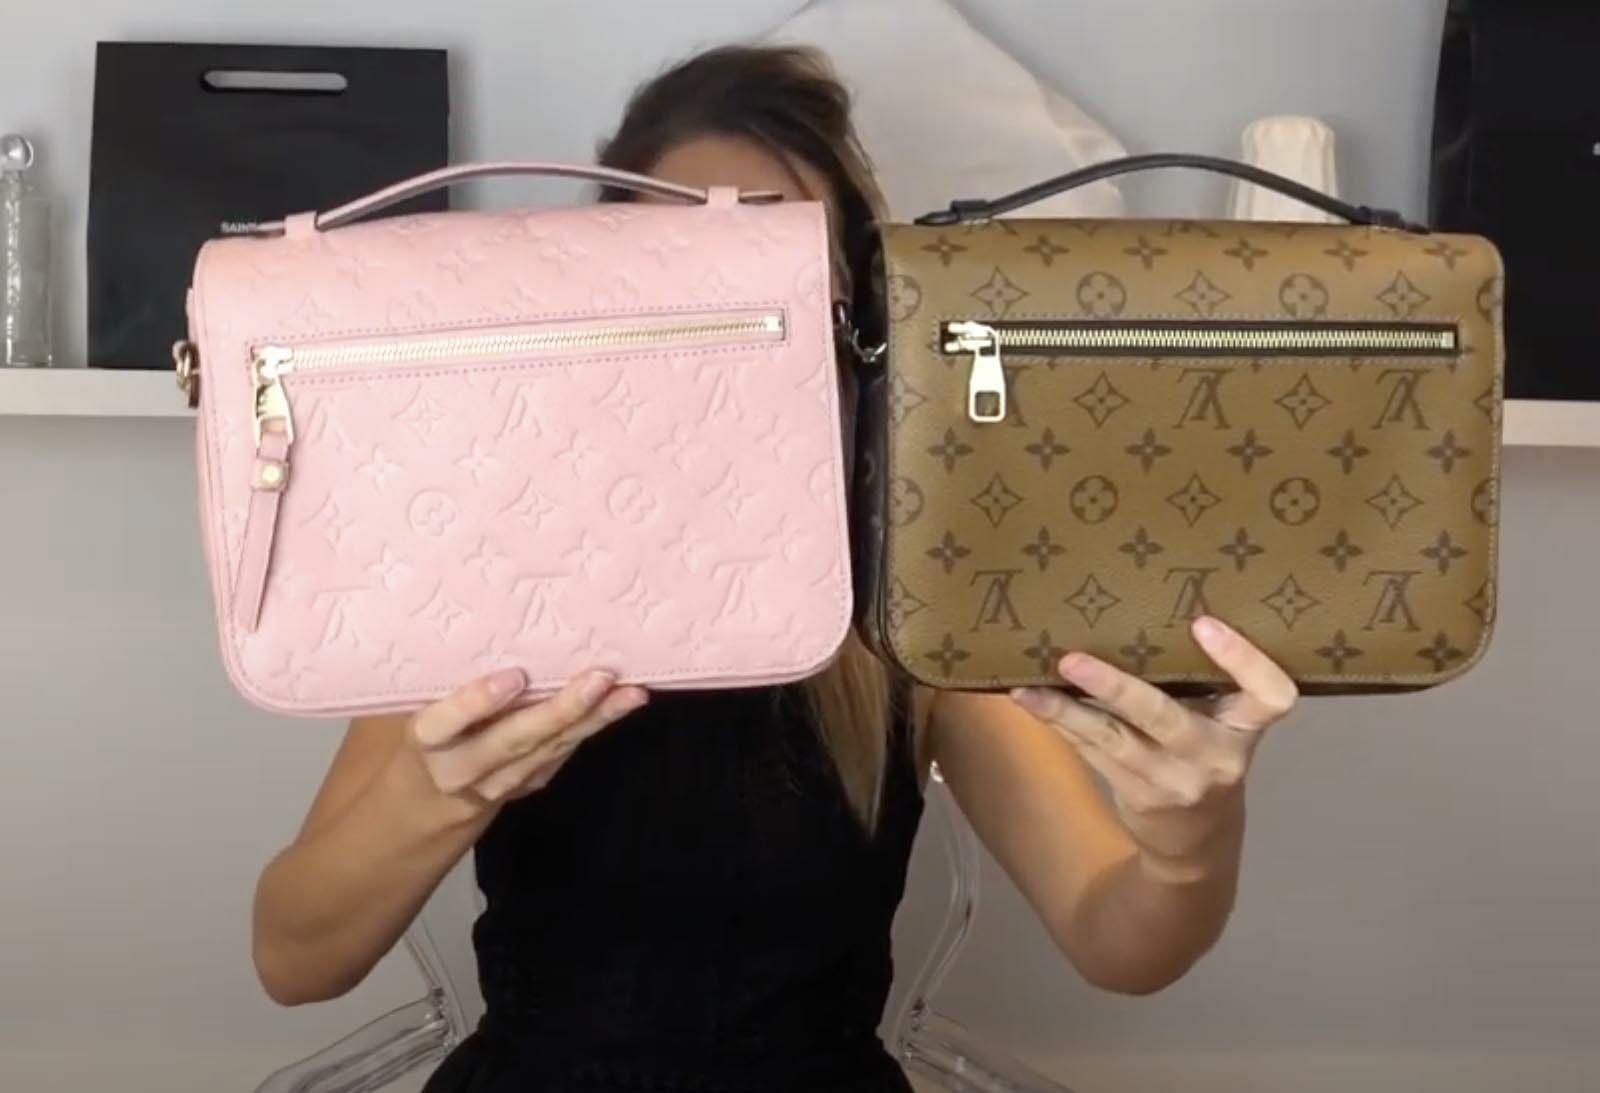 Louis Vuitton Brown and Pink Limited Edition Metis Handbag, 2018